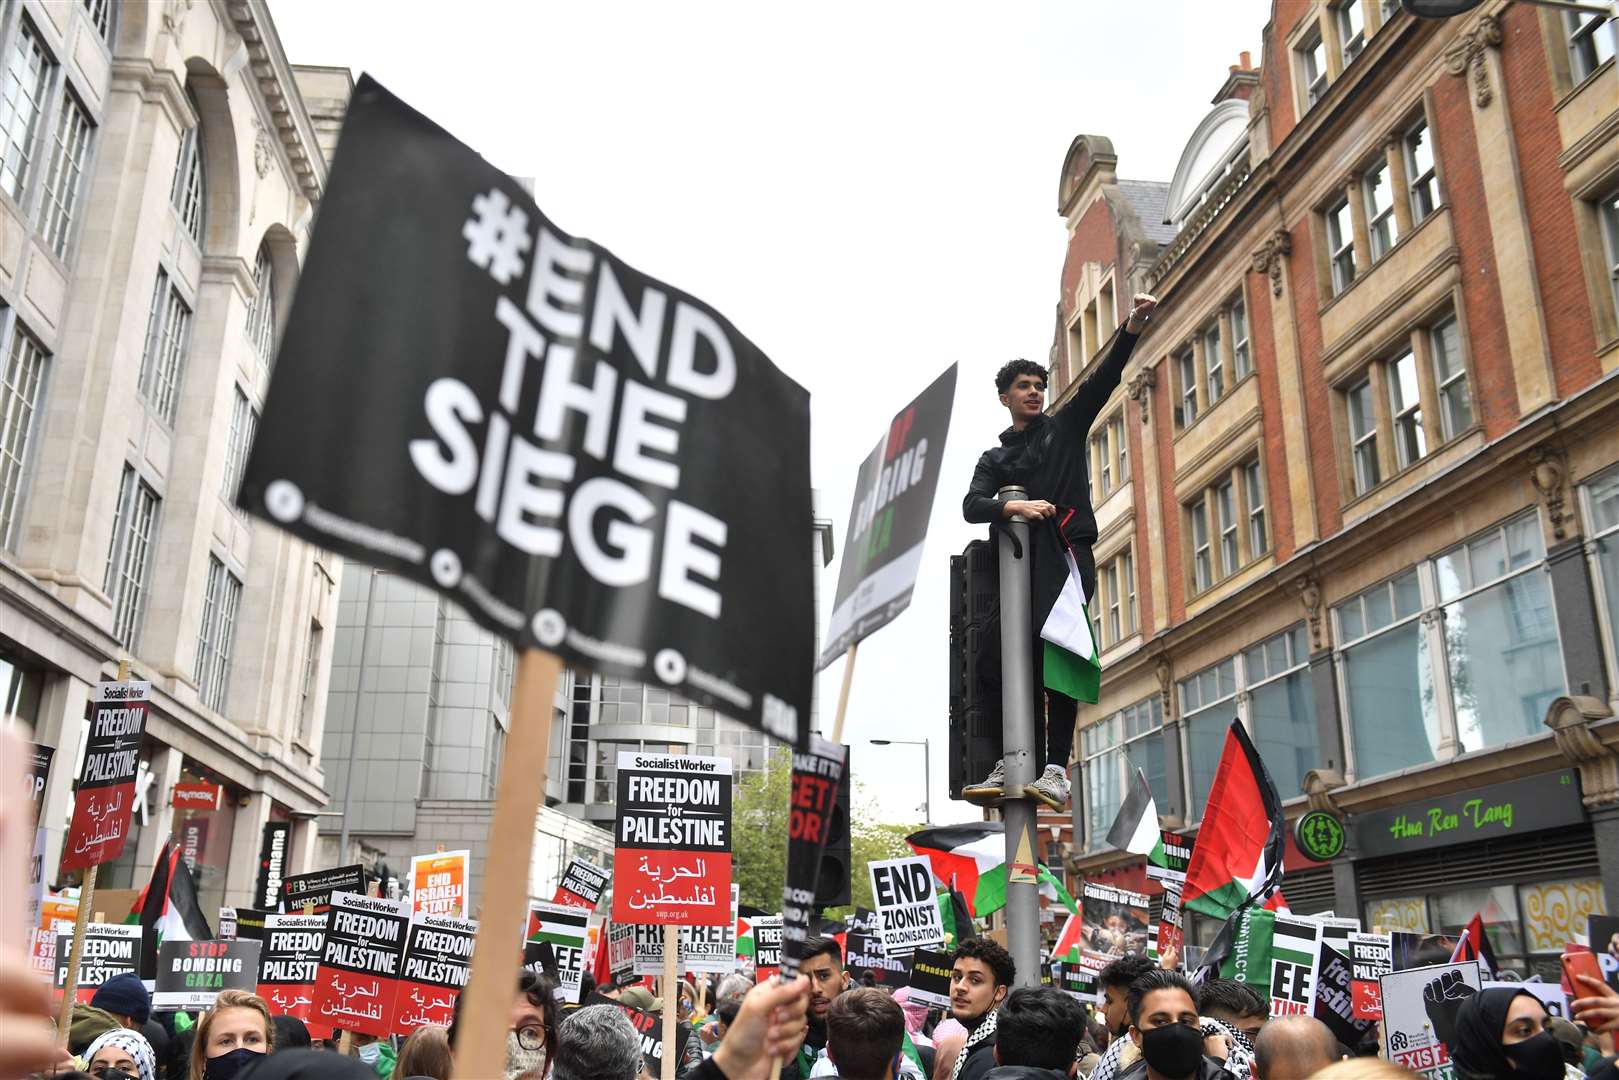 Organisers of the march want the UK Government to take action to help end the violence in Gaza and the West Bank (Dominic Lipinski/PA)